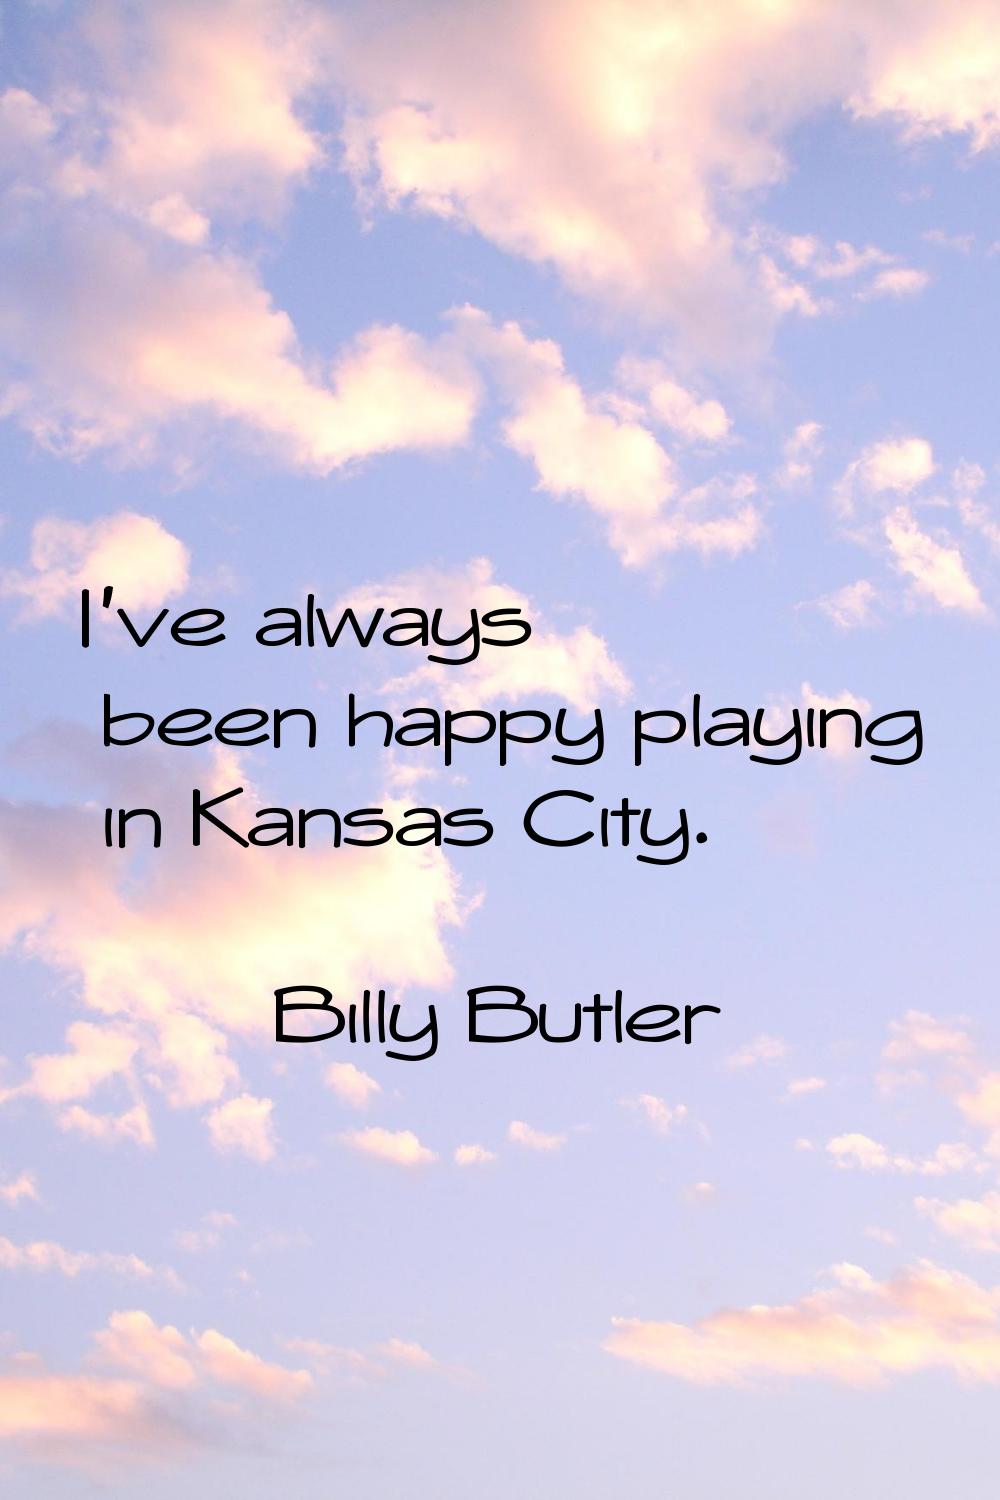 I've always been happy playing in Kansas City.